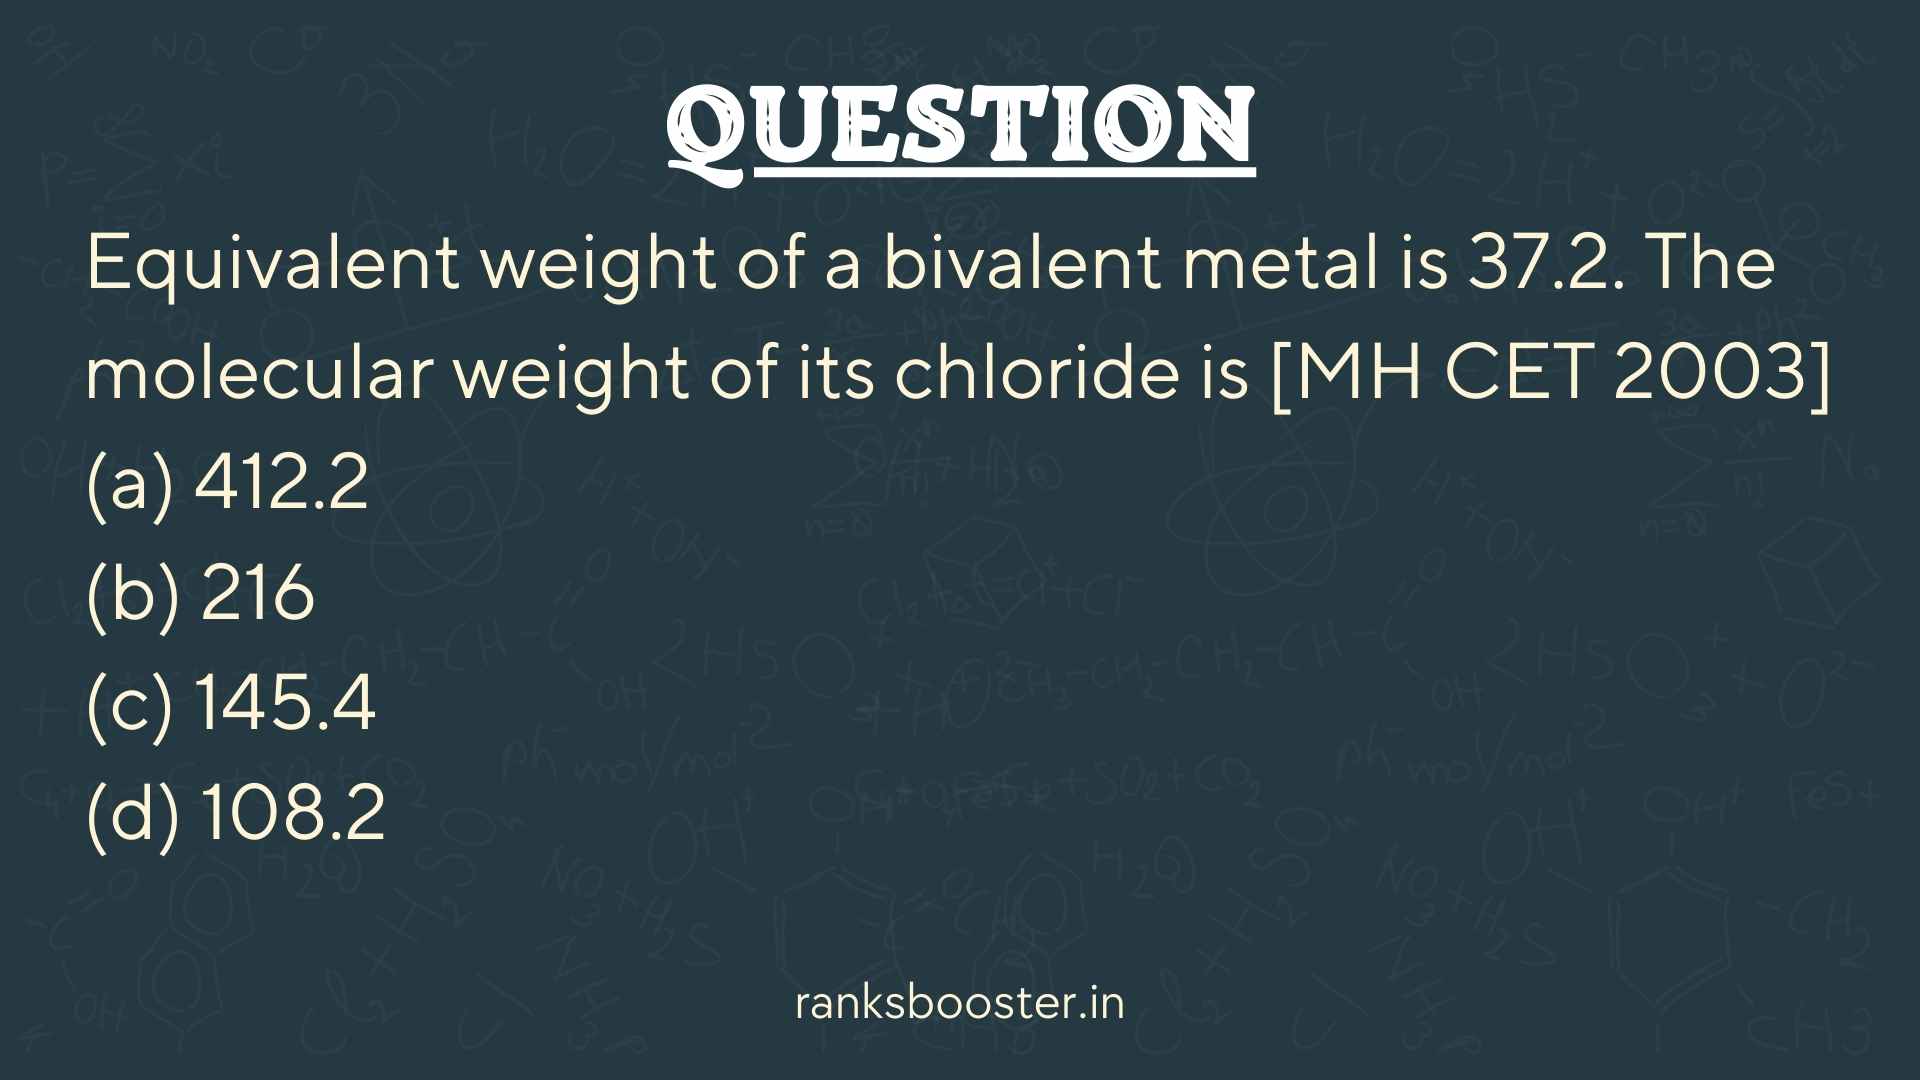 Equivalent weight of a bivalent metal is 37.2. The molecular weight of its chloride is [MH CET 2003] (a) 412.2 (b) 216 (c) 145.4 (d) 108.2